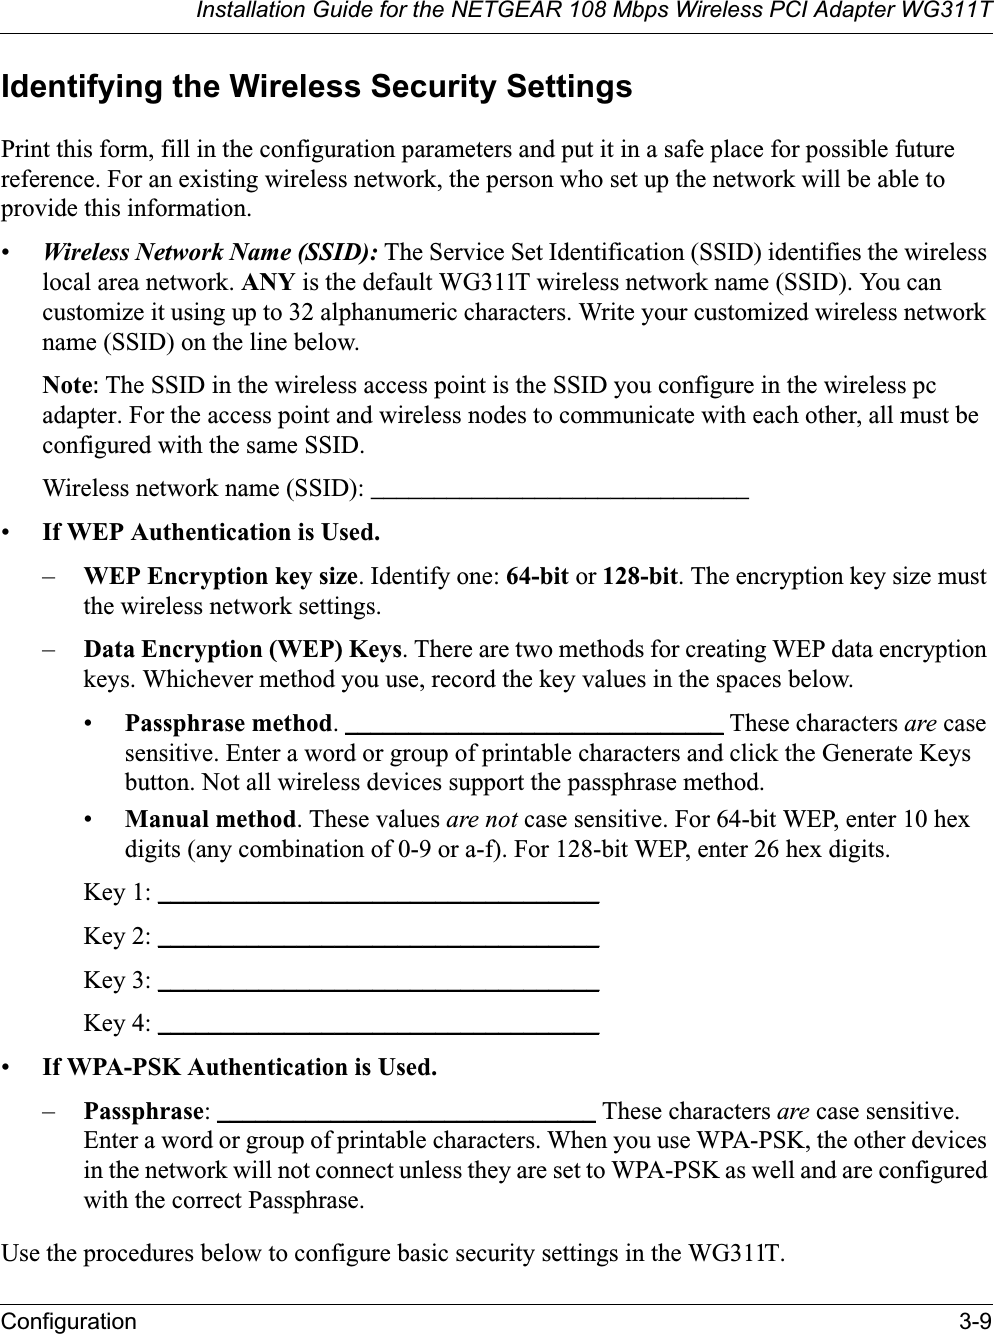 Installation Guide for the NETGEAR 108 Mbps Wireless PCI Adapter WG311TConfiguration 3-9Identifying the Wireless Security SettingsPrint this form, fill in the configuration parameters and put it in a safe place for possible future reference. For an existing wireless network, the person who set up the network will be able to provide this information.•Wireless Network Name (SSID): The Service Set Identification (SSID) identifies the wireless local area network. ANY is the default WG311T wireless network name (SSID). You can customize it using up to 32 alphanumeric characters. Write your customized wireless network name (SSID) on the line below. Note: The SSID in the wireless access point is the SSID you configure in the wireless pc adapter. For the access point and wireless nodes to communicate with each other, all must be configured with the same SSID.Wireless network name (SSID): ______________________________ •If WEP Authentication is Used.–WEP Encryption key size. Identify one: 64-bit or 128-bit. The encryption key size must the wireless network settings.–Data Encryption (WEP) Keys. There are two methods for creating WEP data encryption keys. Whichever method you use, record the key values in the spaces below.•Passphrase method. ______________________________ These characters are case sensitive. Enter a word or group of printable characters and click the Generate Keys button. Not all wireless devices support the passphrase method.•Manual method. These values are not case sensitive. For 64-bit WEP, enter 10 hex digits (any combination of 0-9 or a-f). For 128-bit WEP, enter 26 hex digits.Key 1: ___________________________________Key 2: ___________________________________Key 3: ___________________________________Key 4: ___________________________________•If WPA-PSK Authentication is Used.–Passphrase: ______________________________ These characters are case sensitive. Enter a word or group of printable characters. When you use WPA-PSK, the other devices in the network will not connect unless they are set to WPA-PSK as well and are configured with the correct Passphrase. Use the procedures below to configure basic security settings in the WG311T.